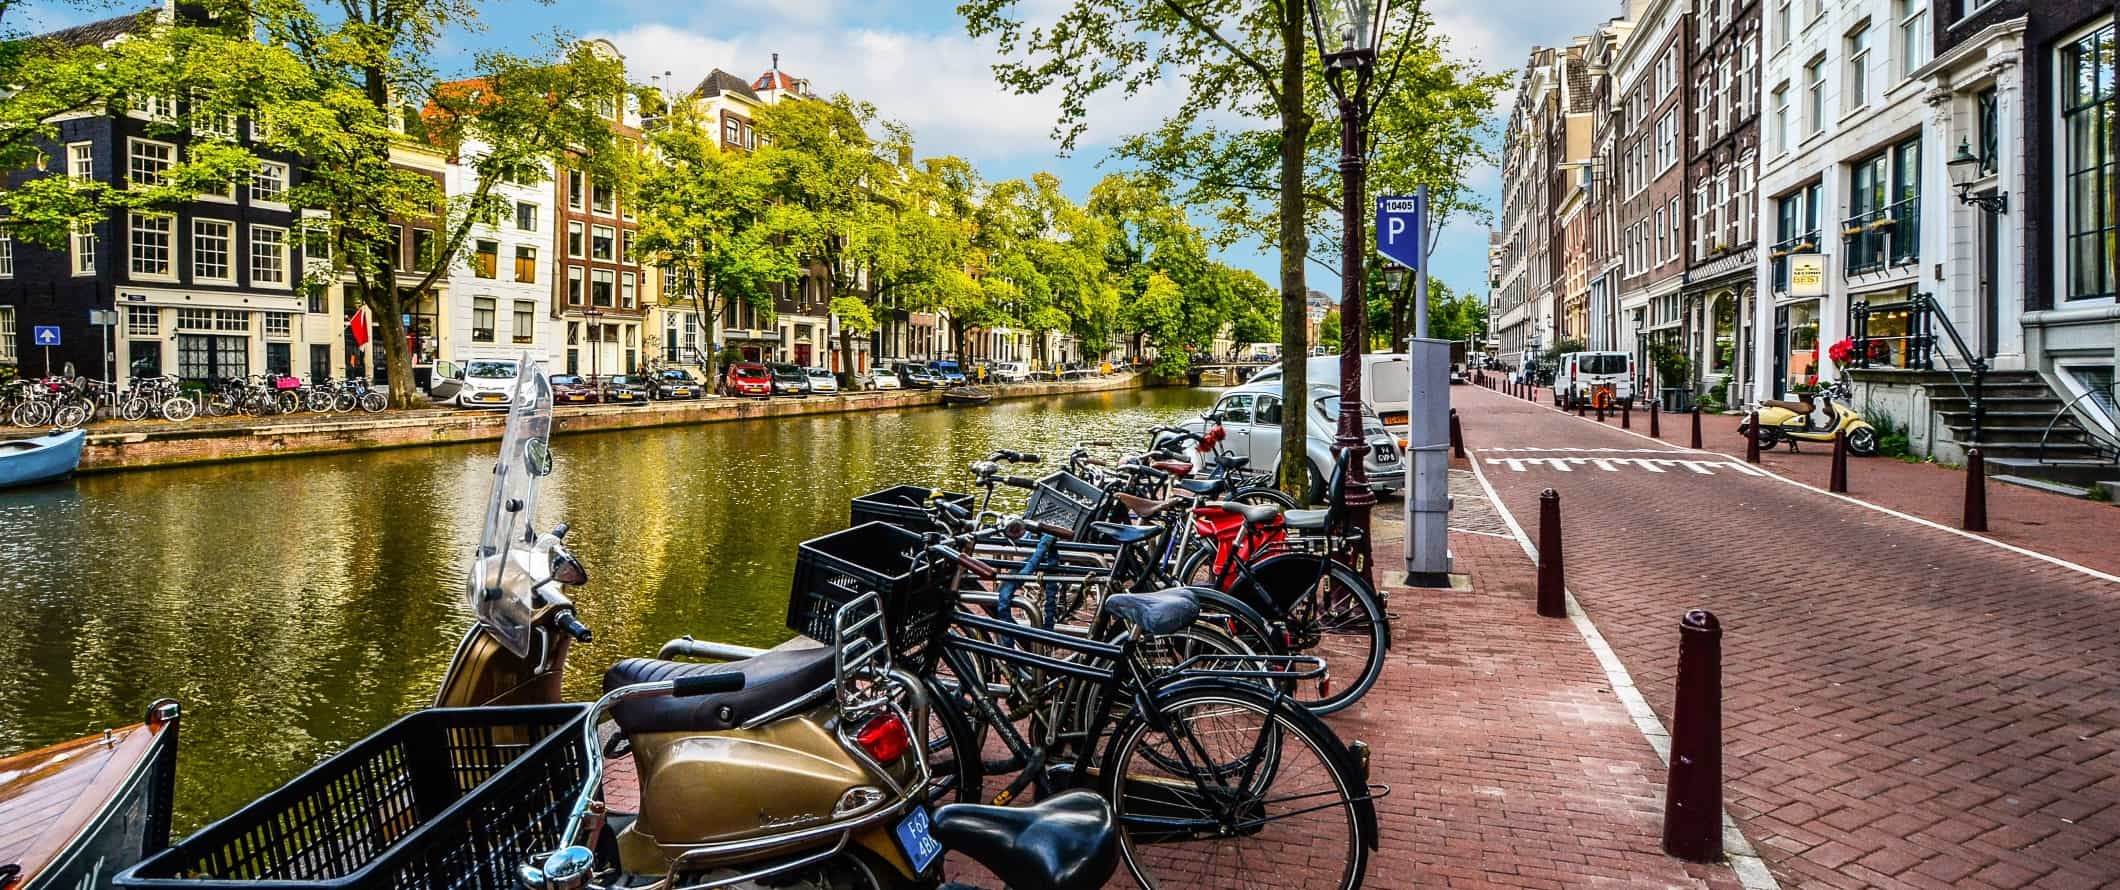 Cluster of bikes locked up along a canal Amsterdam, the Netherlands.